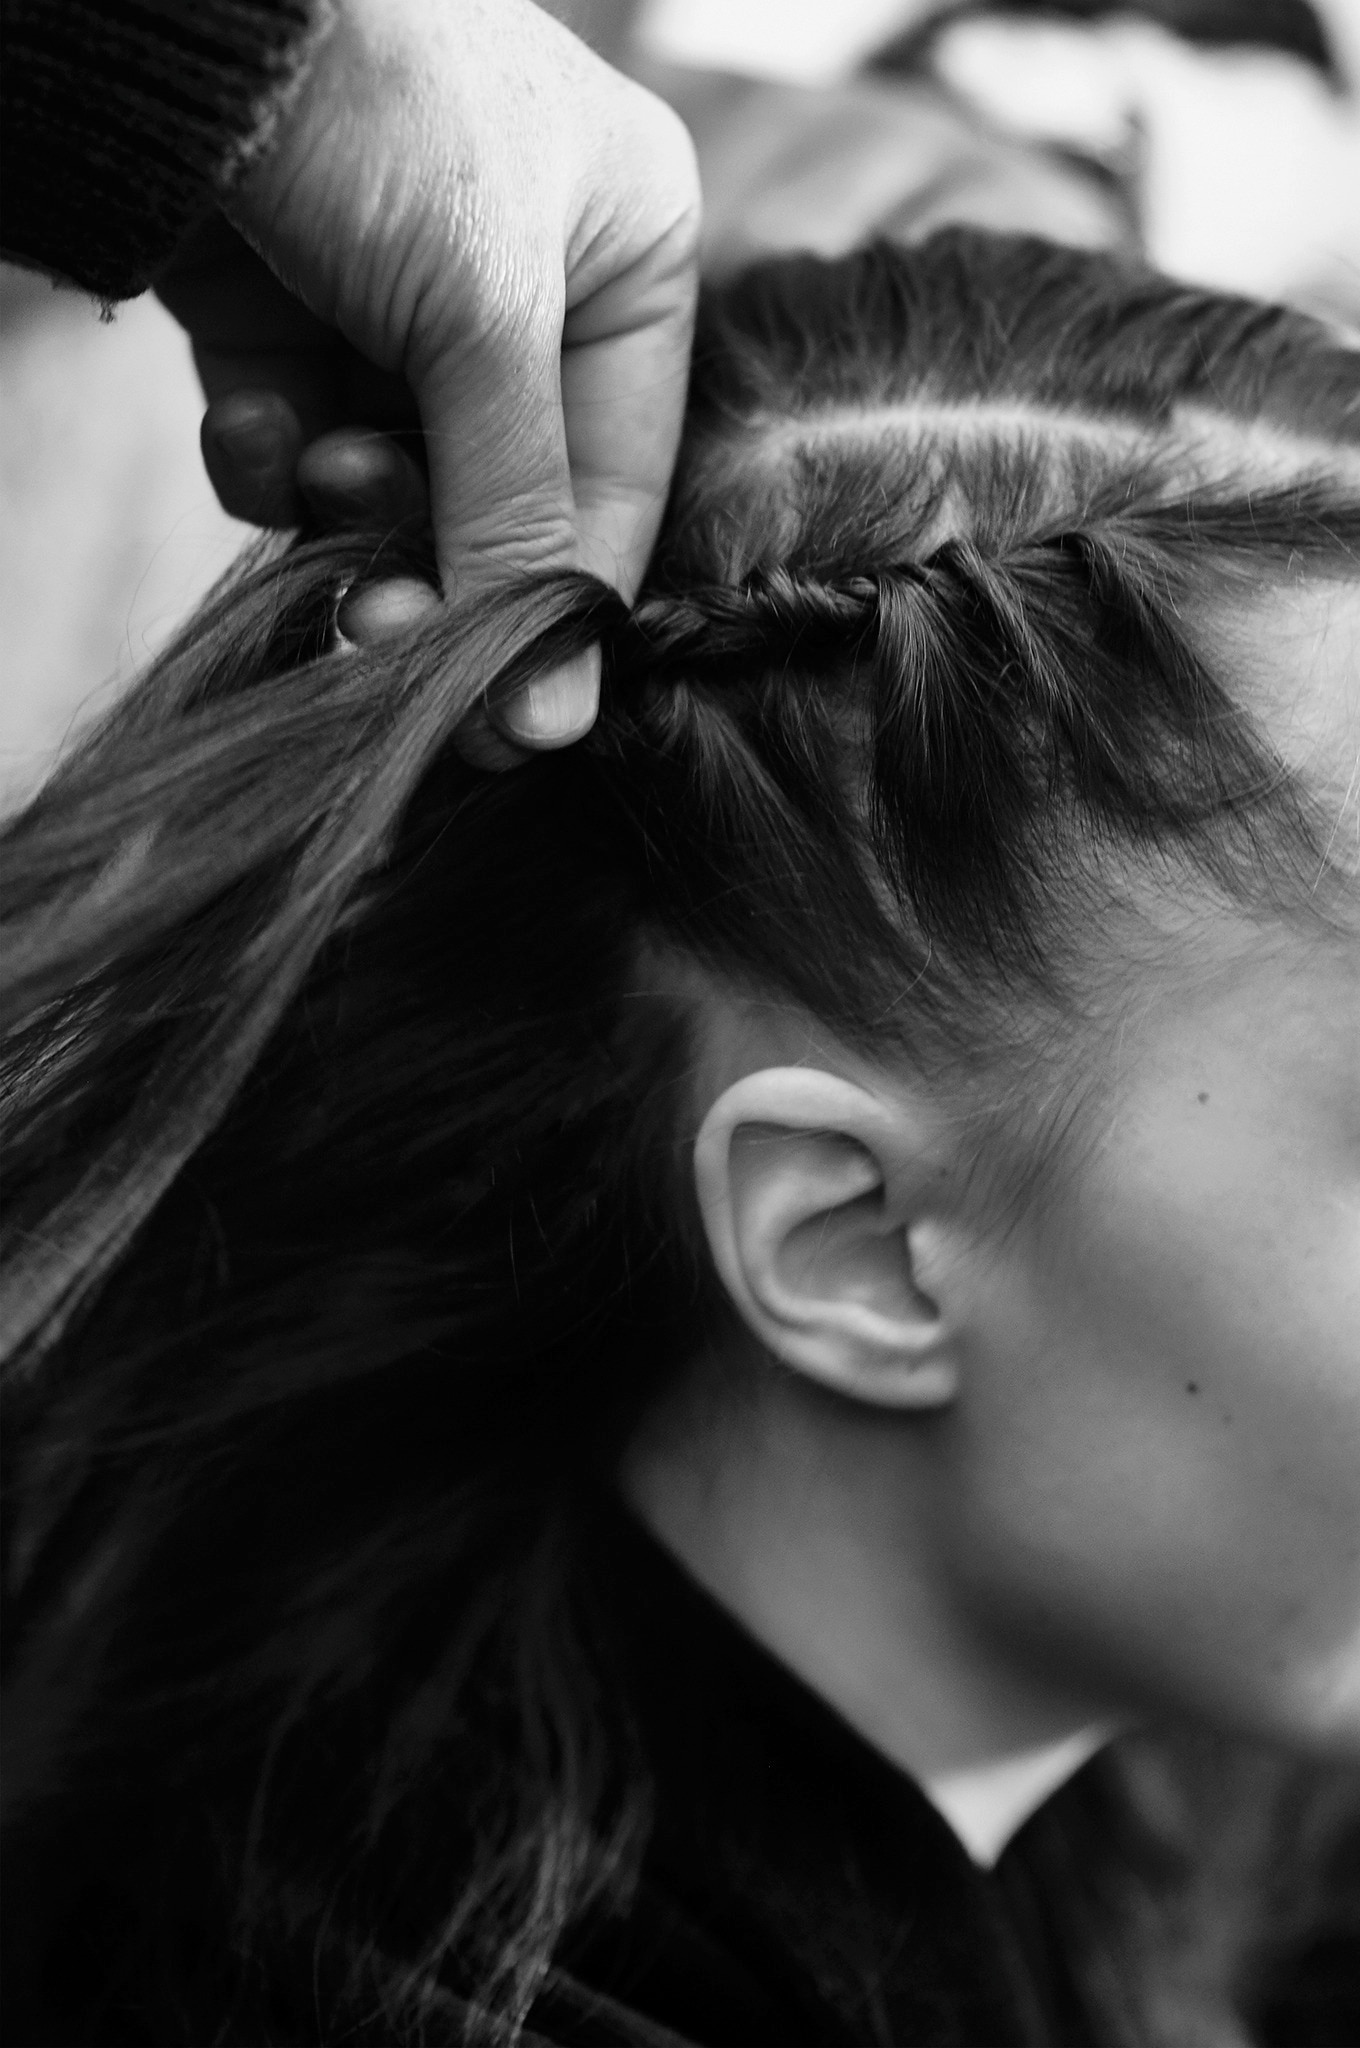 Someone's hands fastening a model's long, dark wavy hair into tight braids.